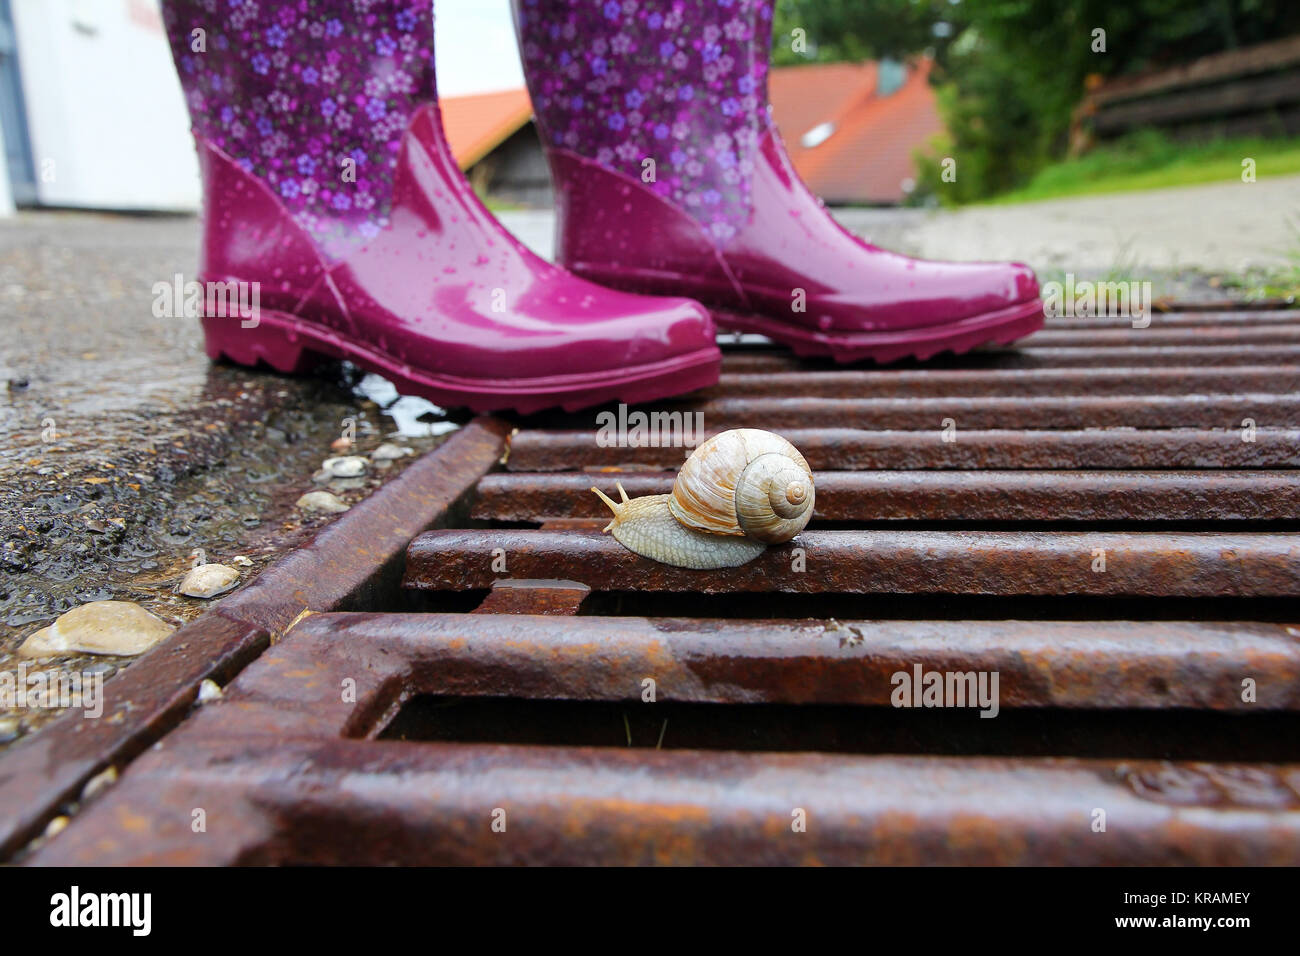 wellies are ideal in rainy weather. a snail on the gulli Stock Photo